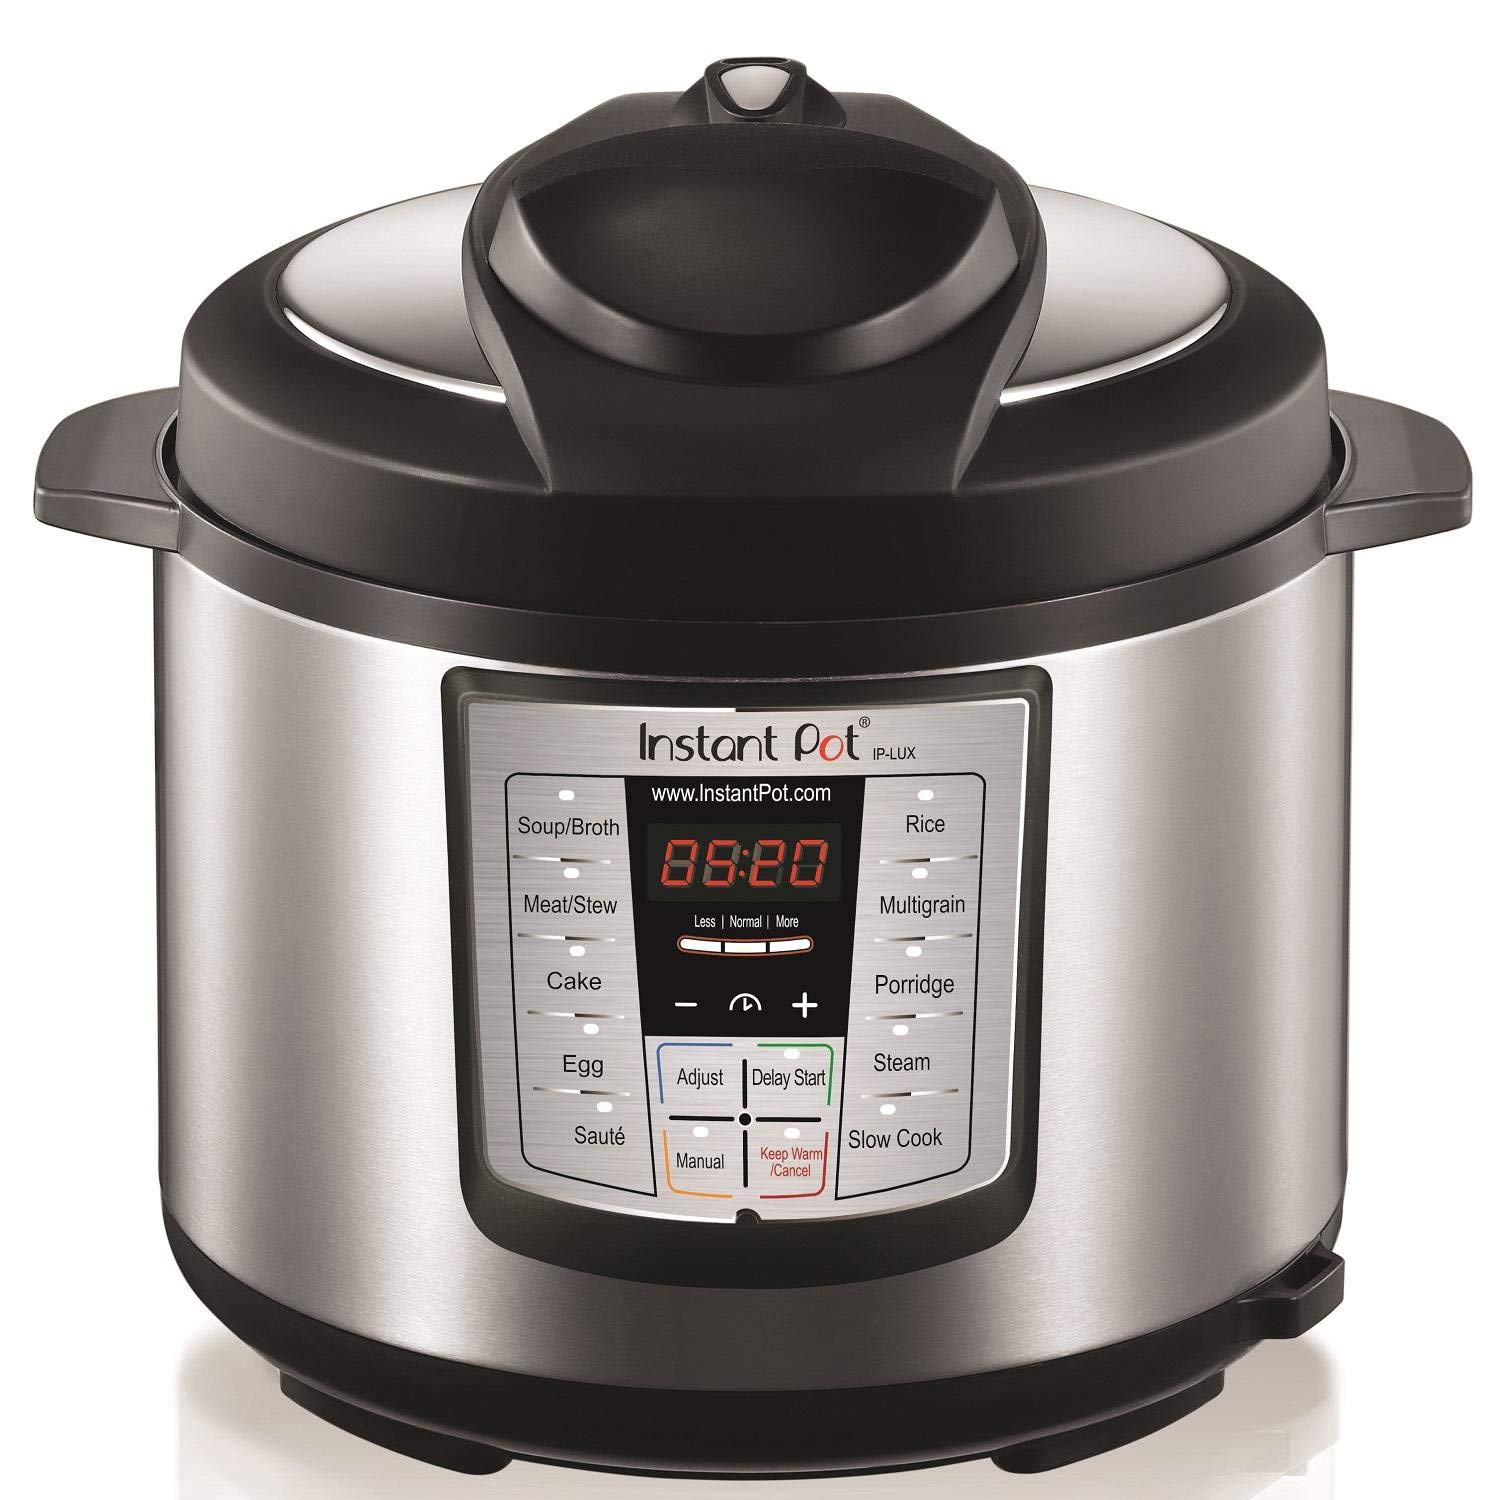 Cheaper than Prime Day! Instant Pot 6-quart 6-in-1 pressure cooker for $49